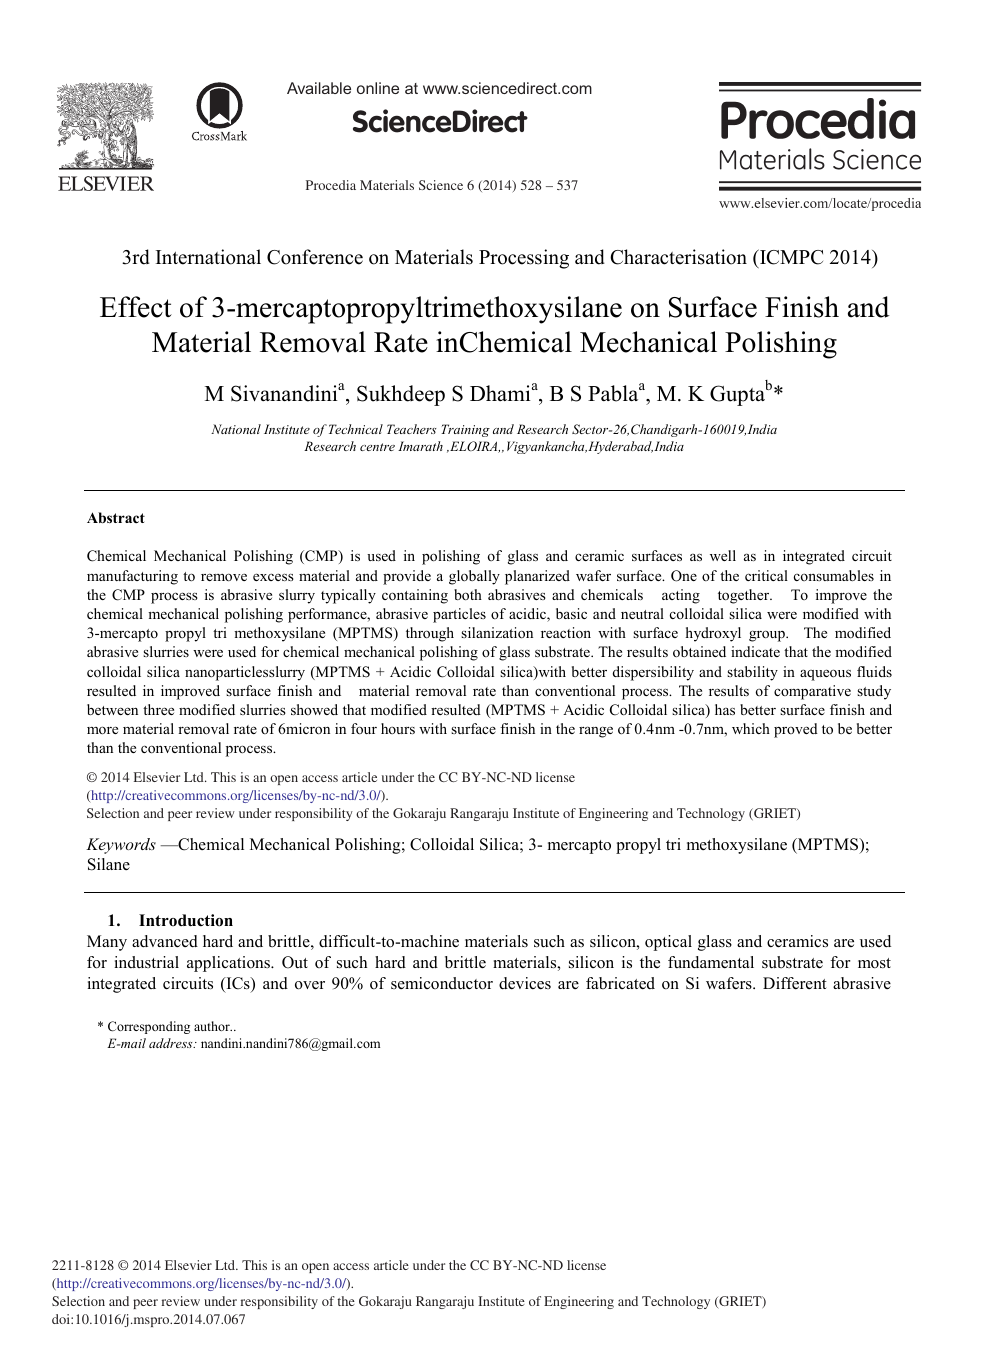 Micro-scale contact behavior and its effect on the material removal process  during chemical mechanical polishing - ScienceDirect